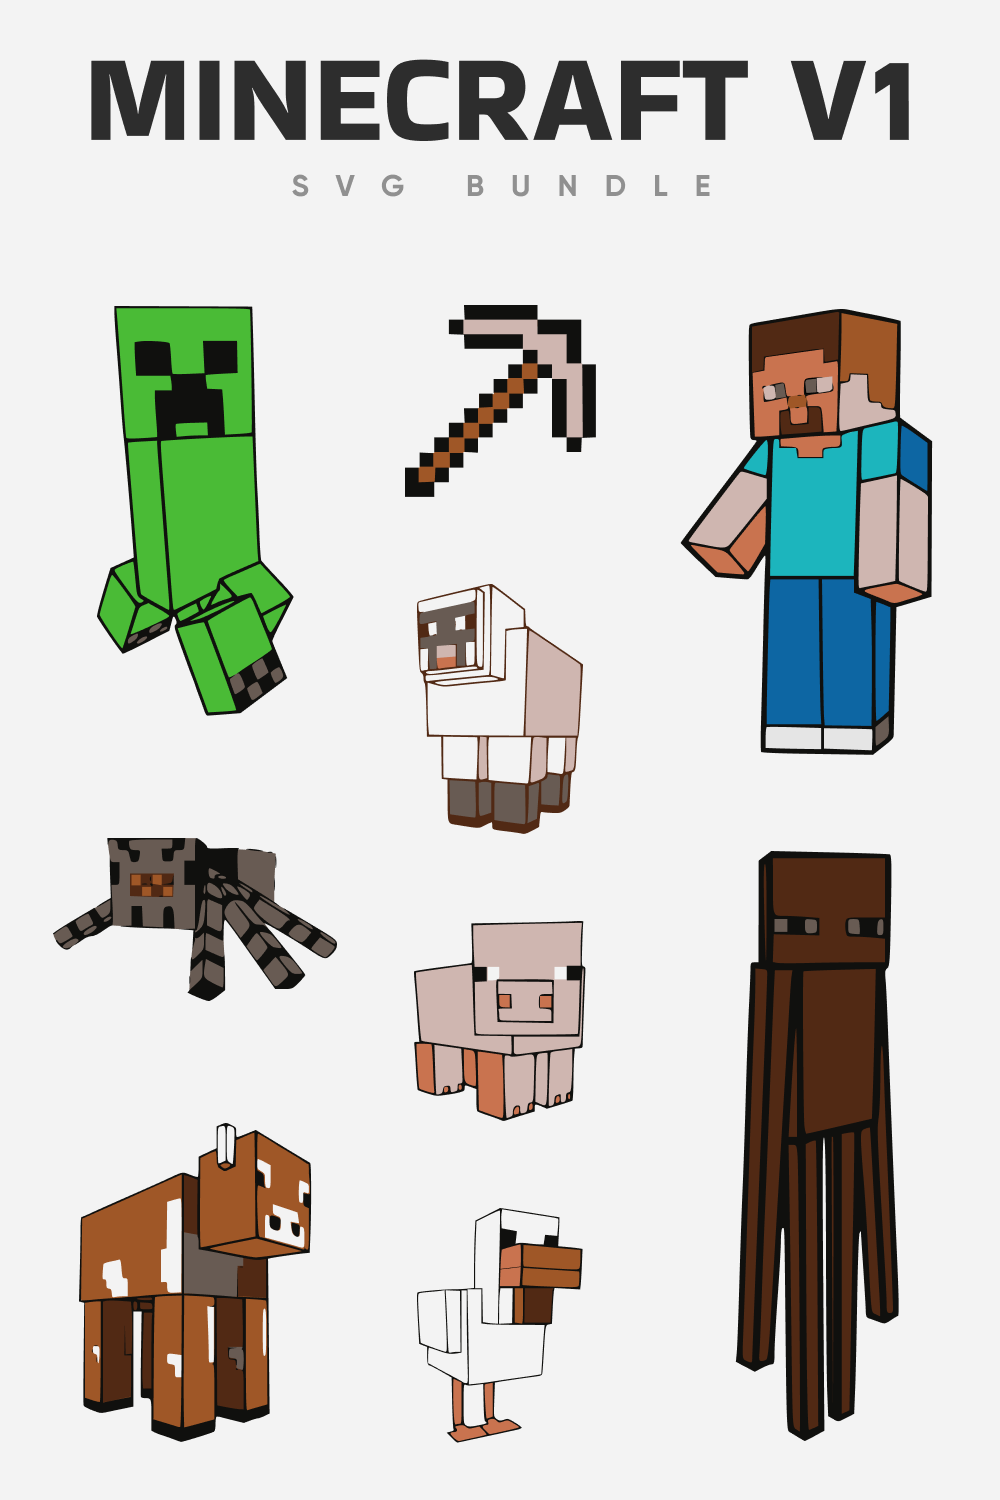 Characters of the game Minecraft Creeper, Sheep, Hero, and others.